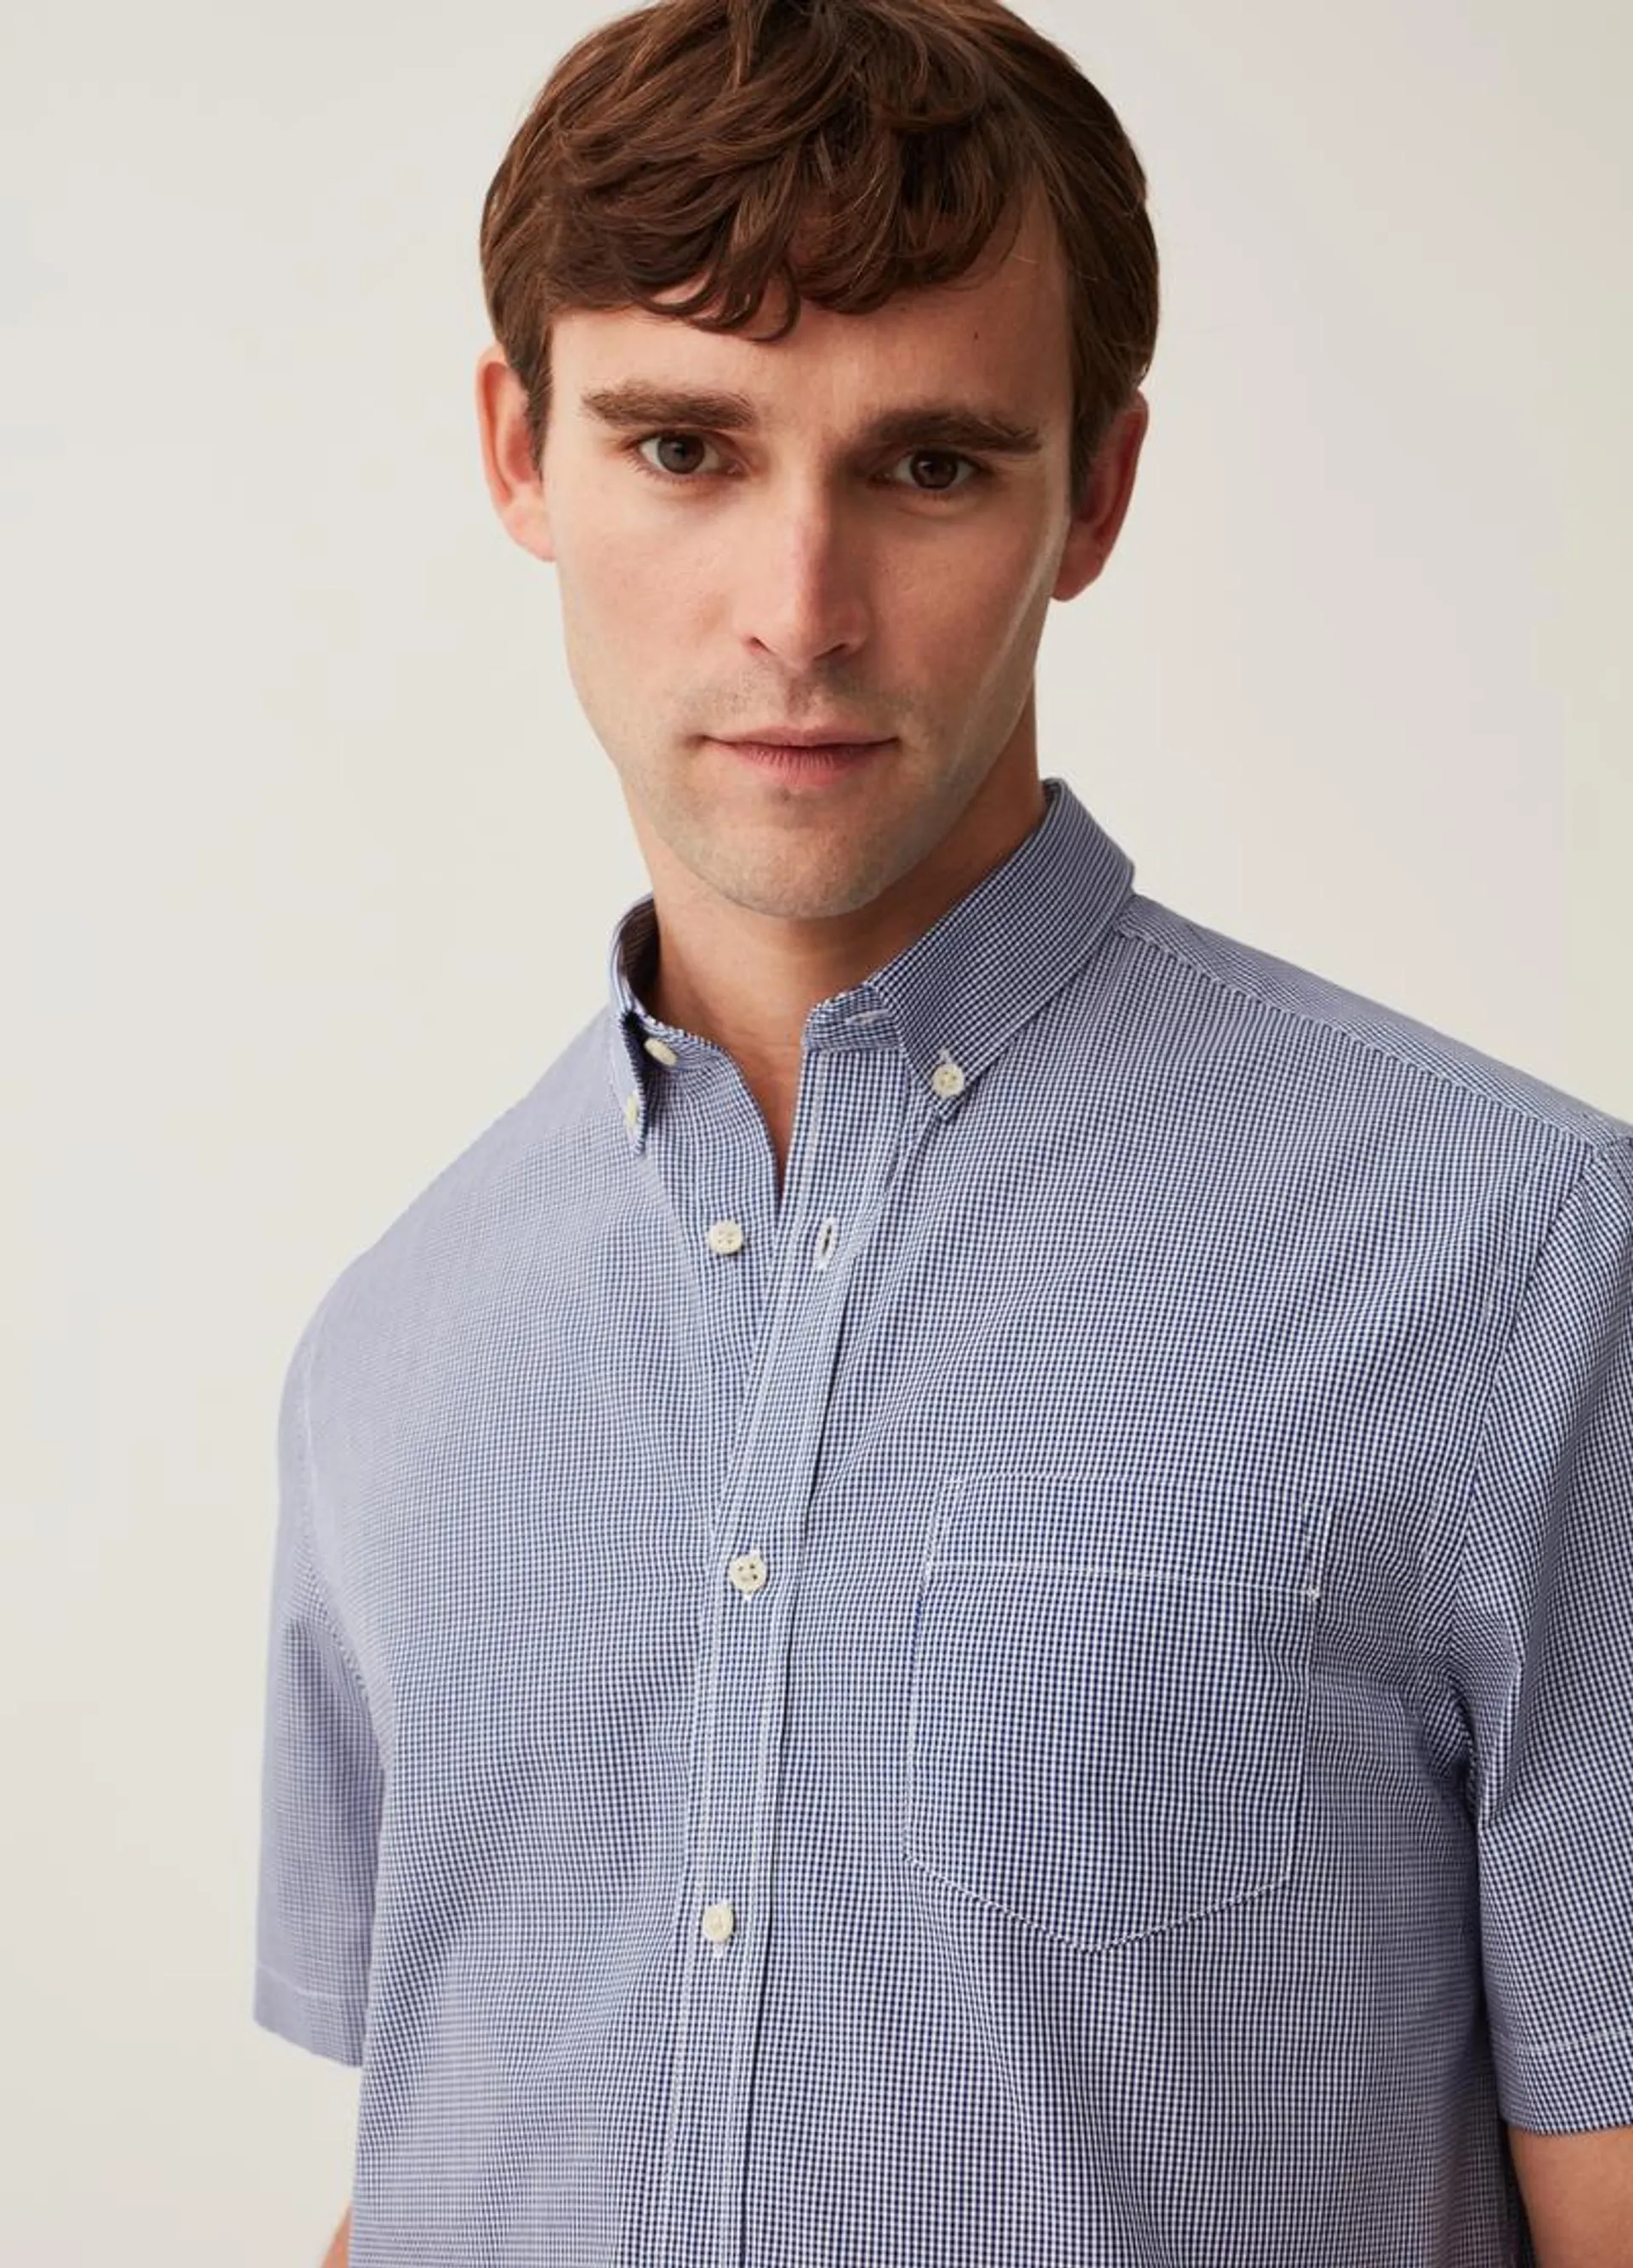 Short-sleeved shirt with micro check pattern.